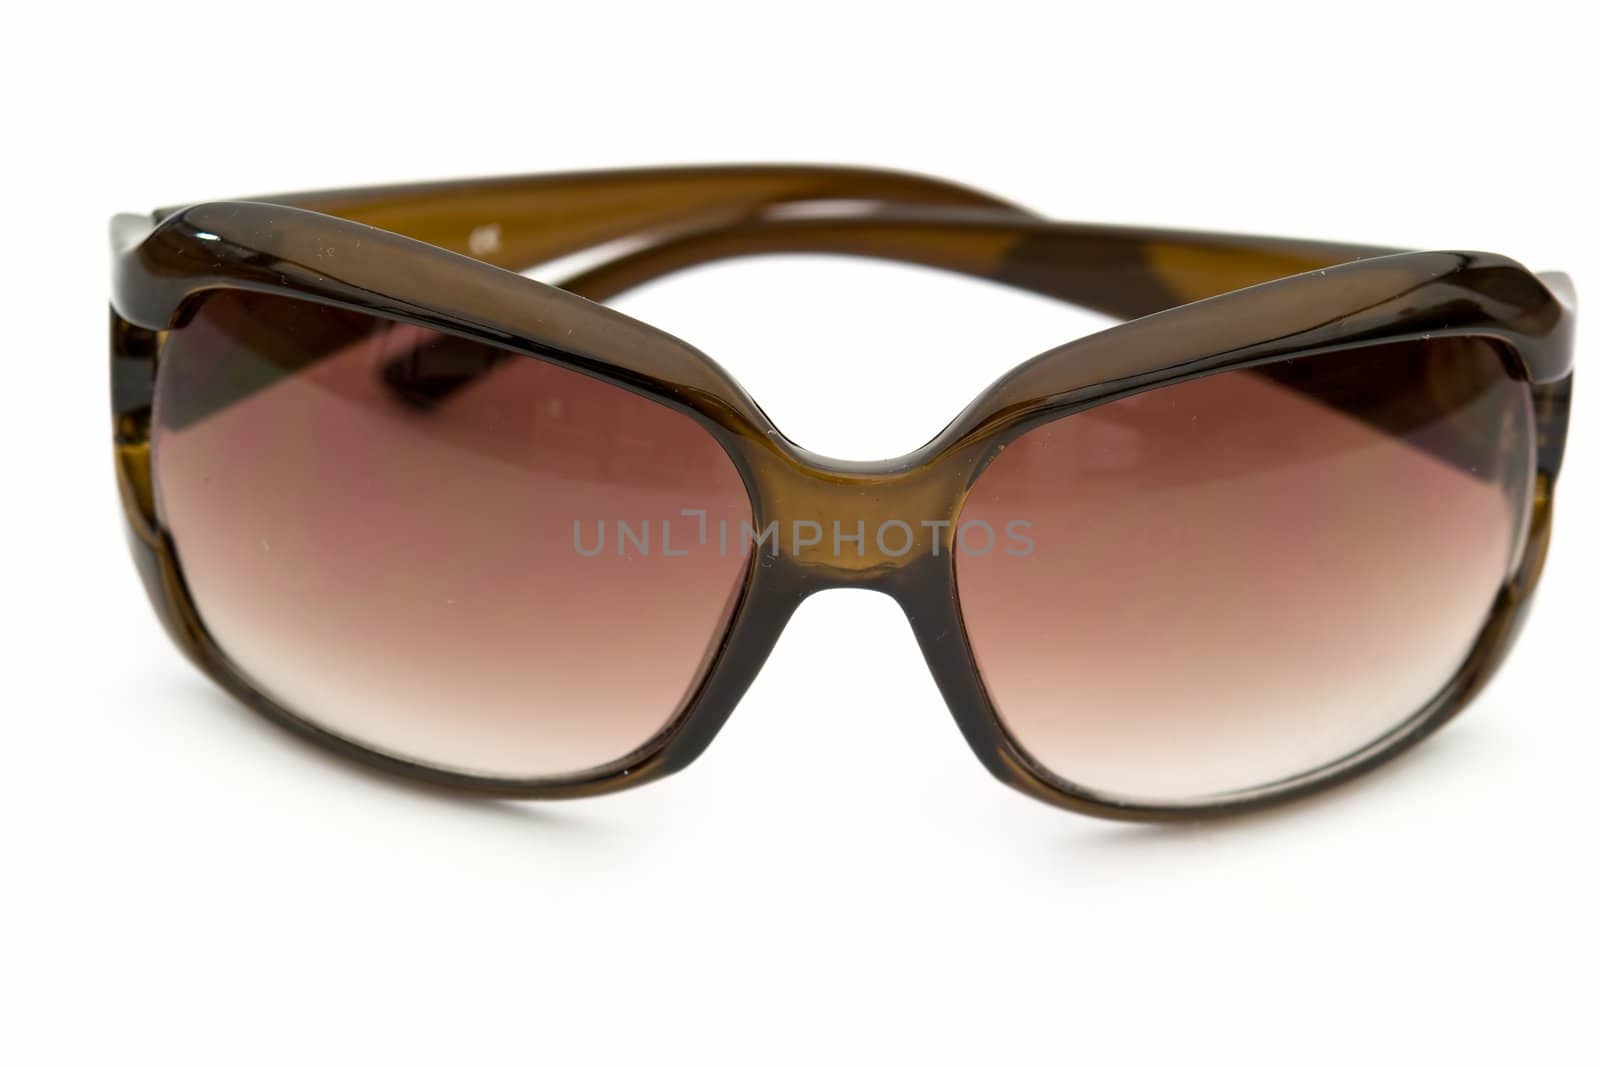 Sunshade. Sun glasses on a white background